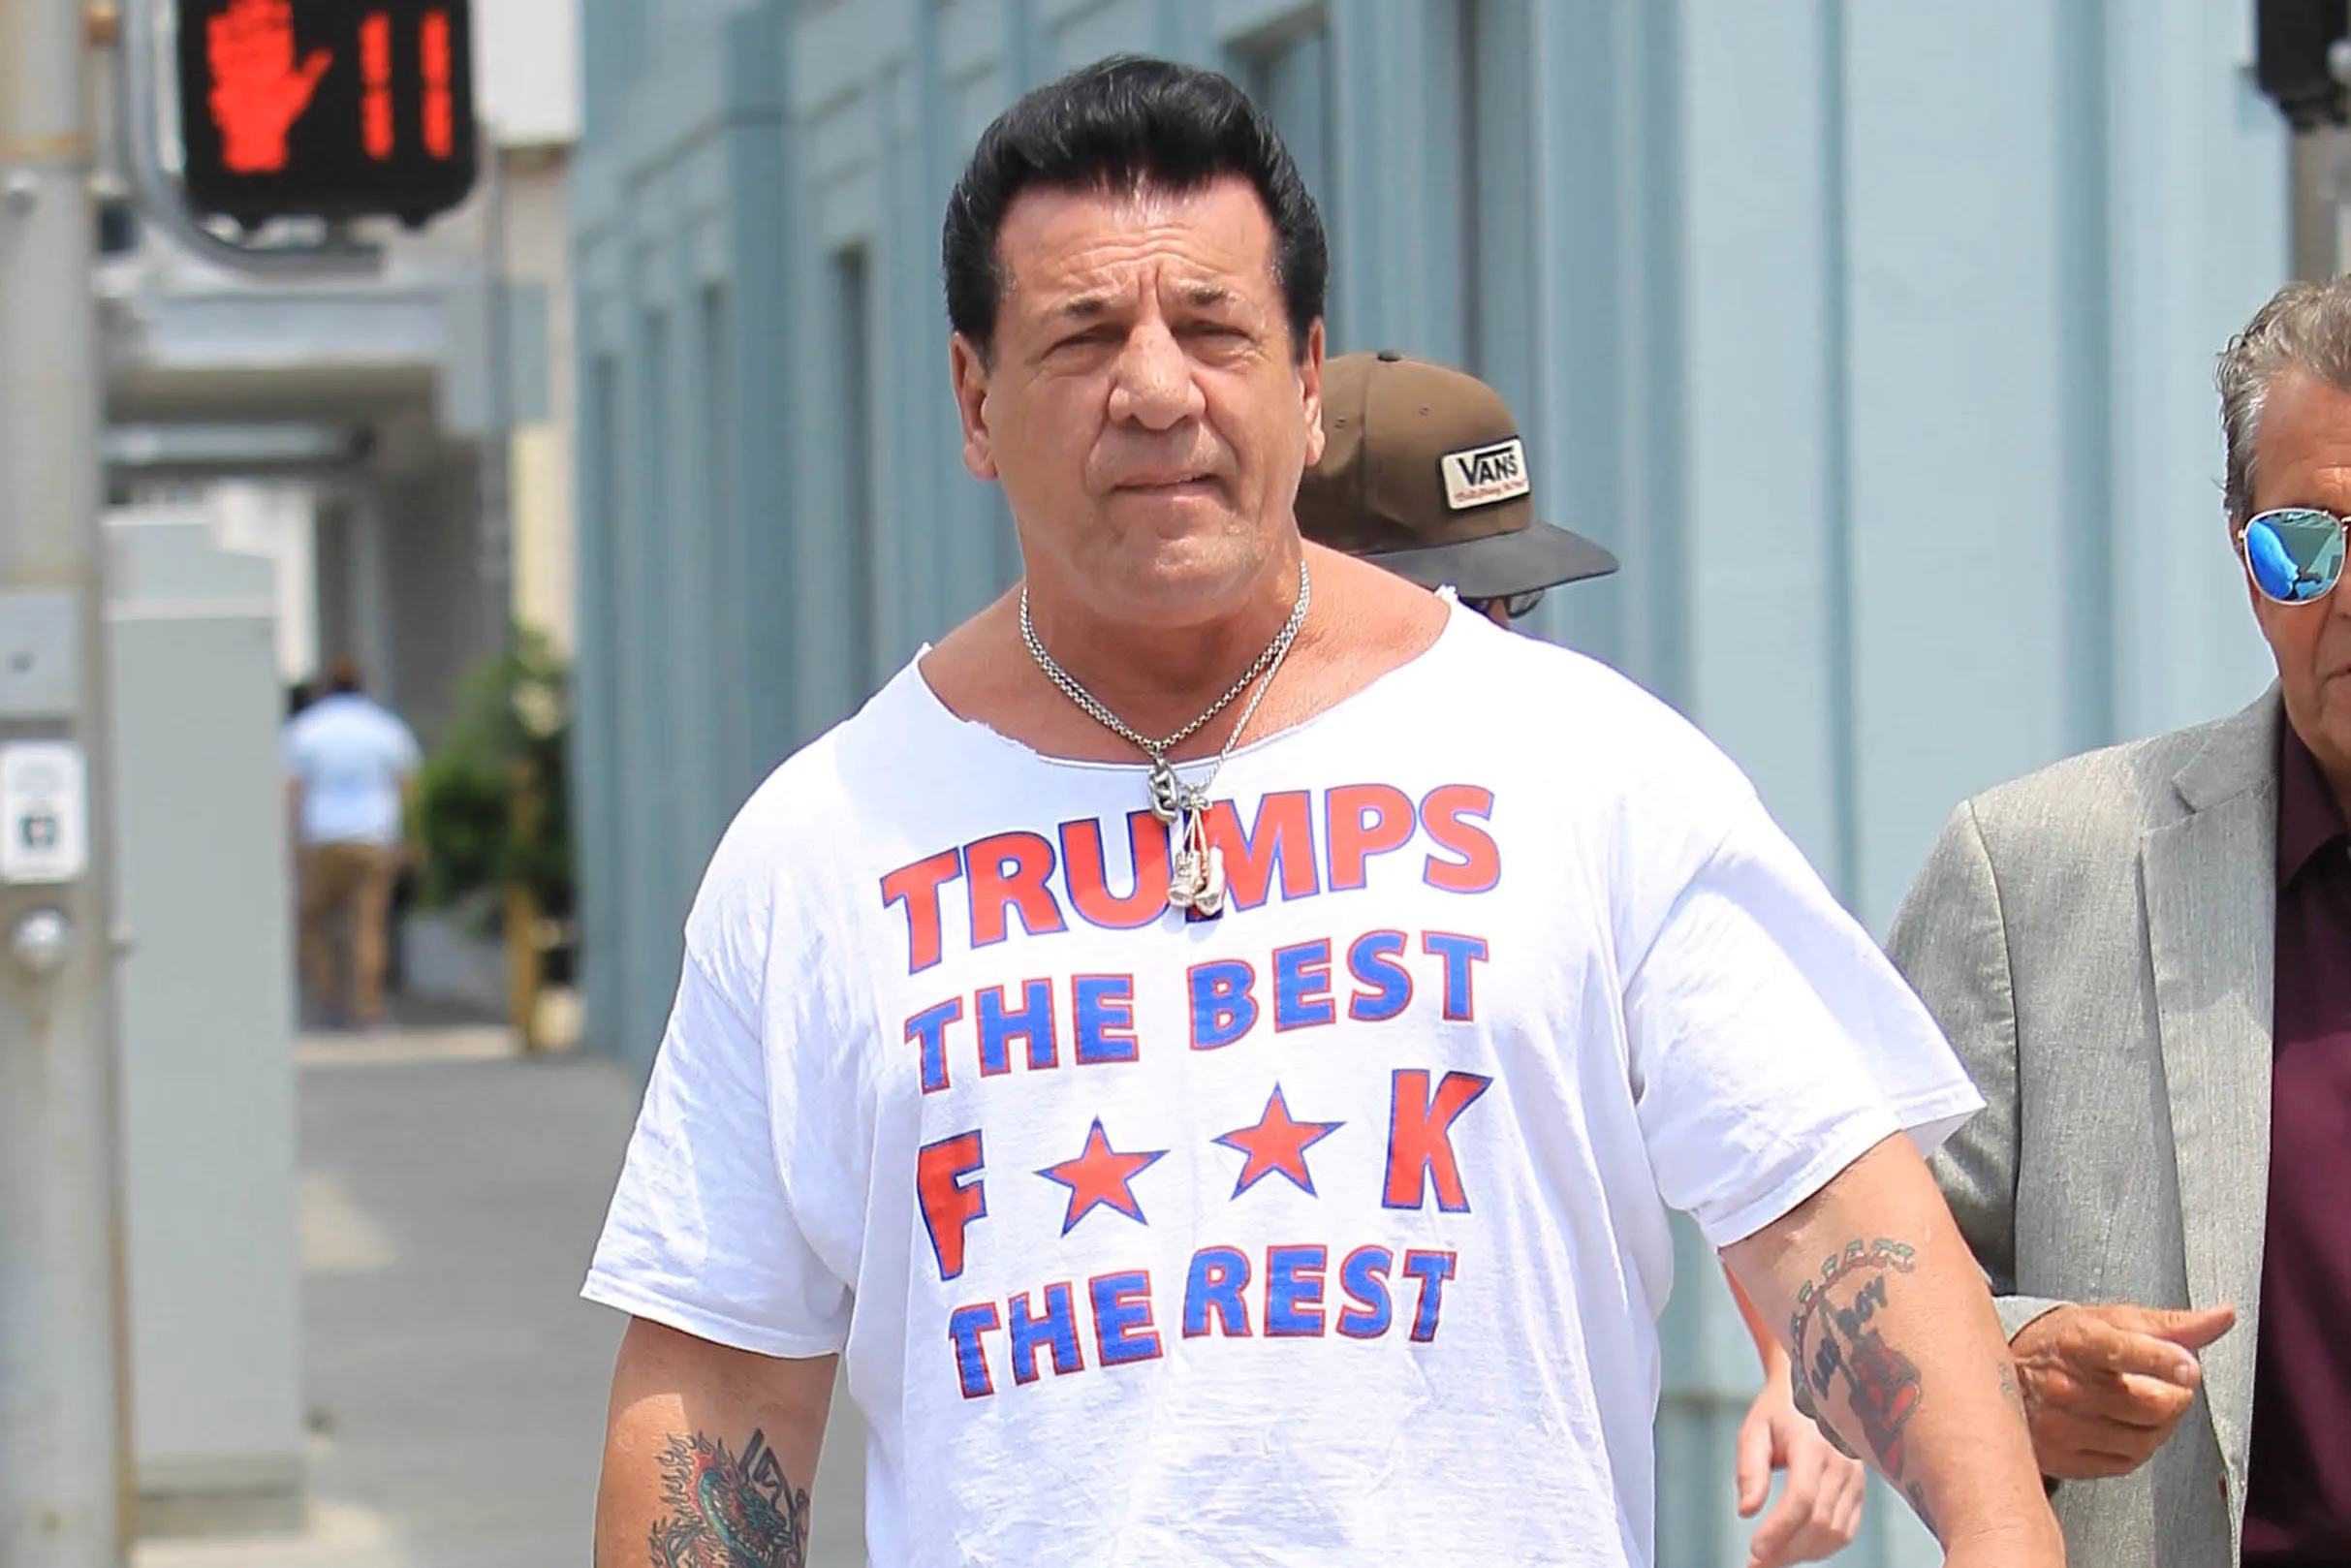 13 Surprising Facts About Chuck Zito - Facts.net